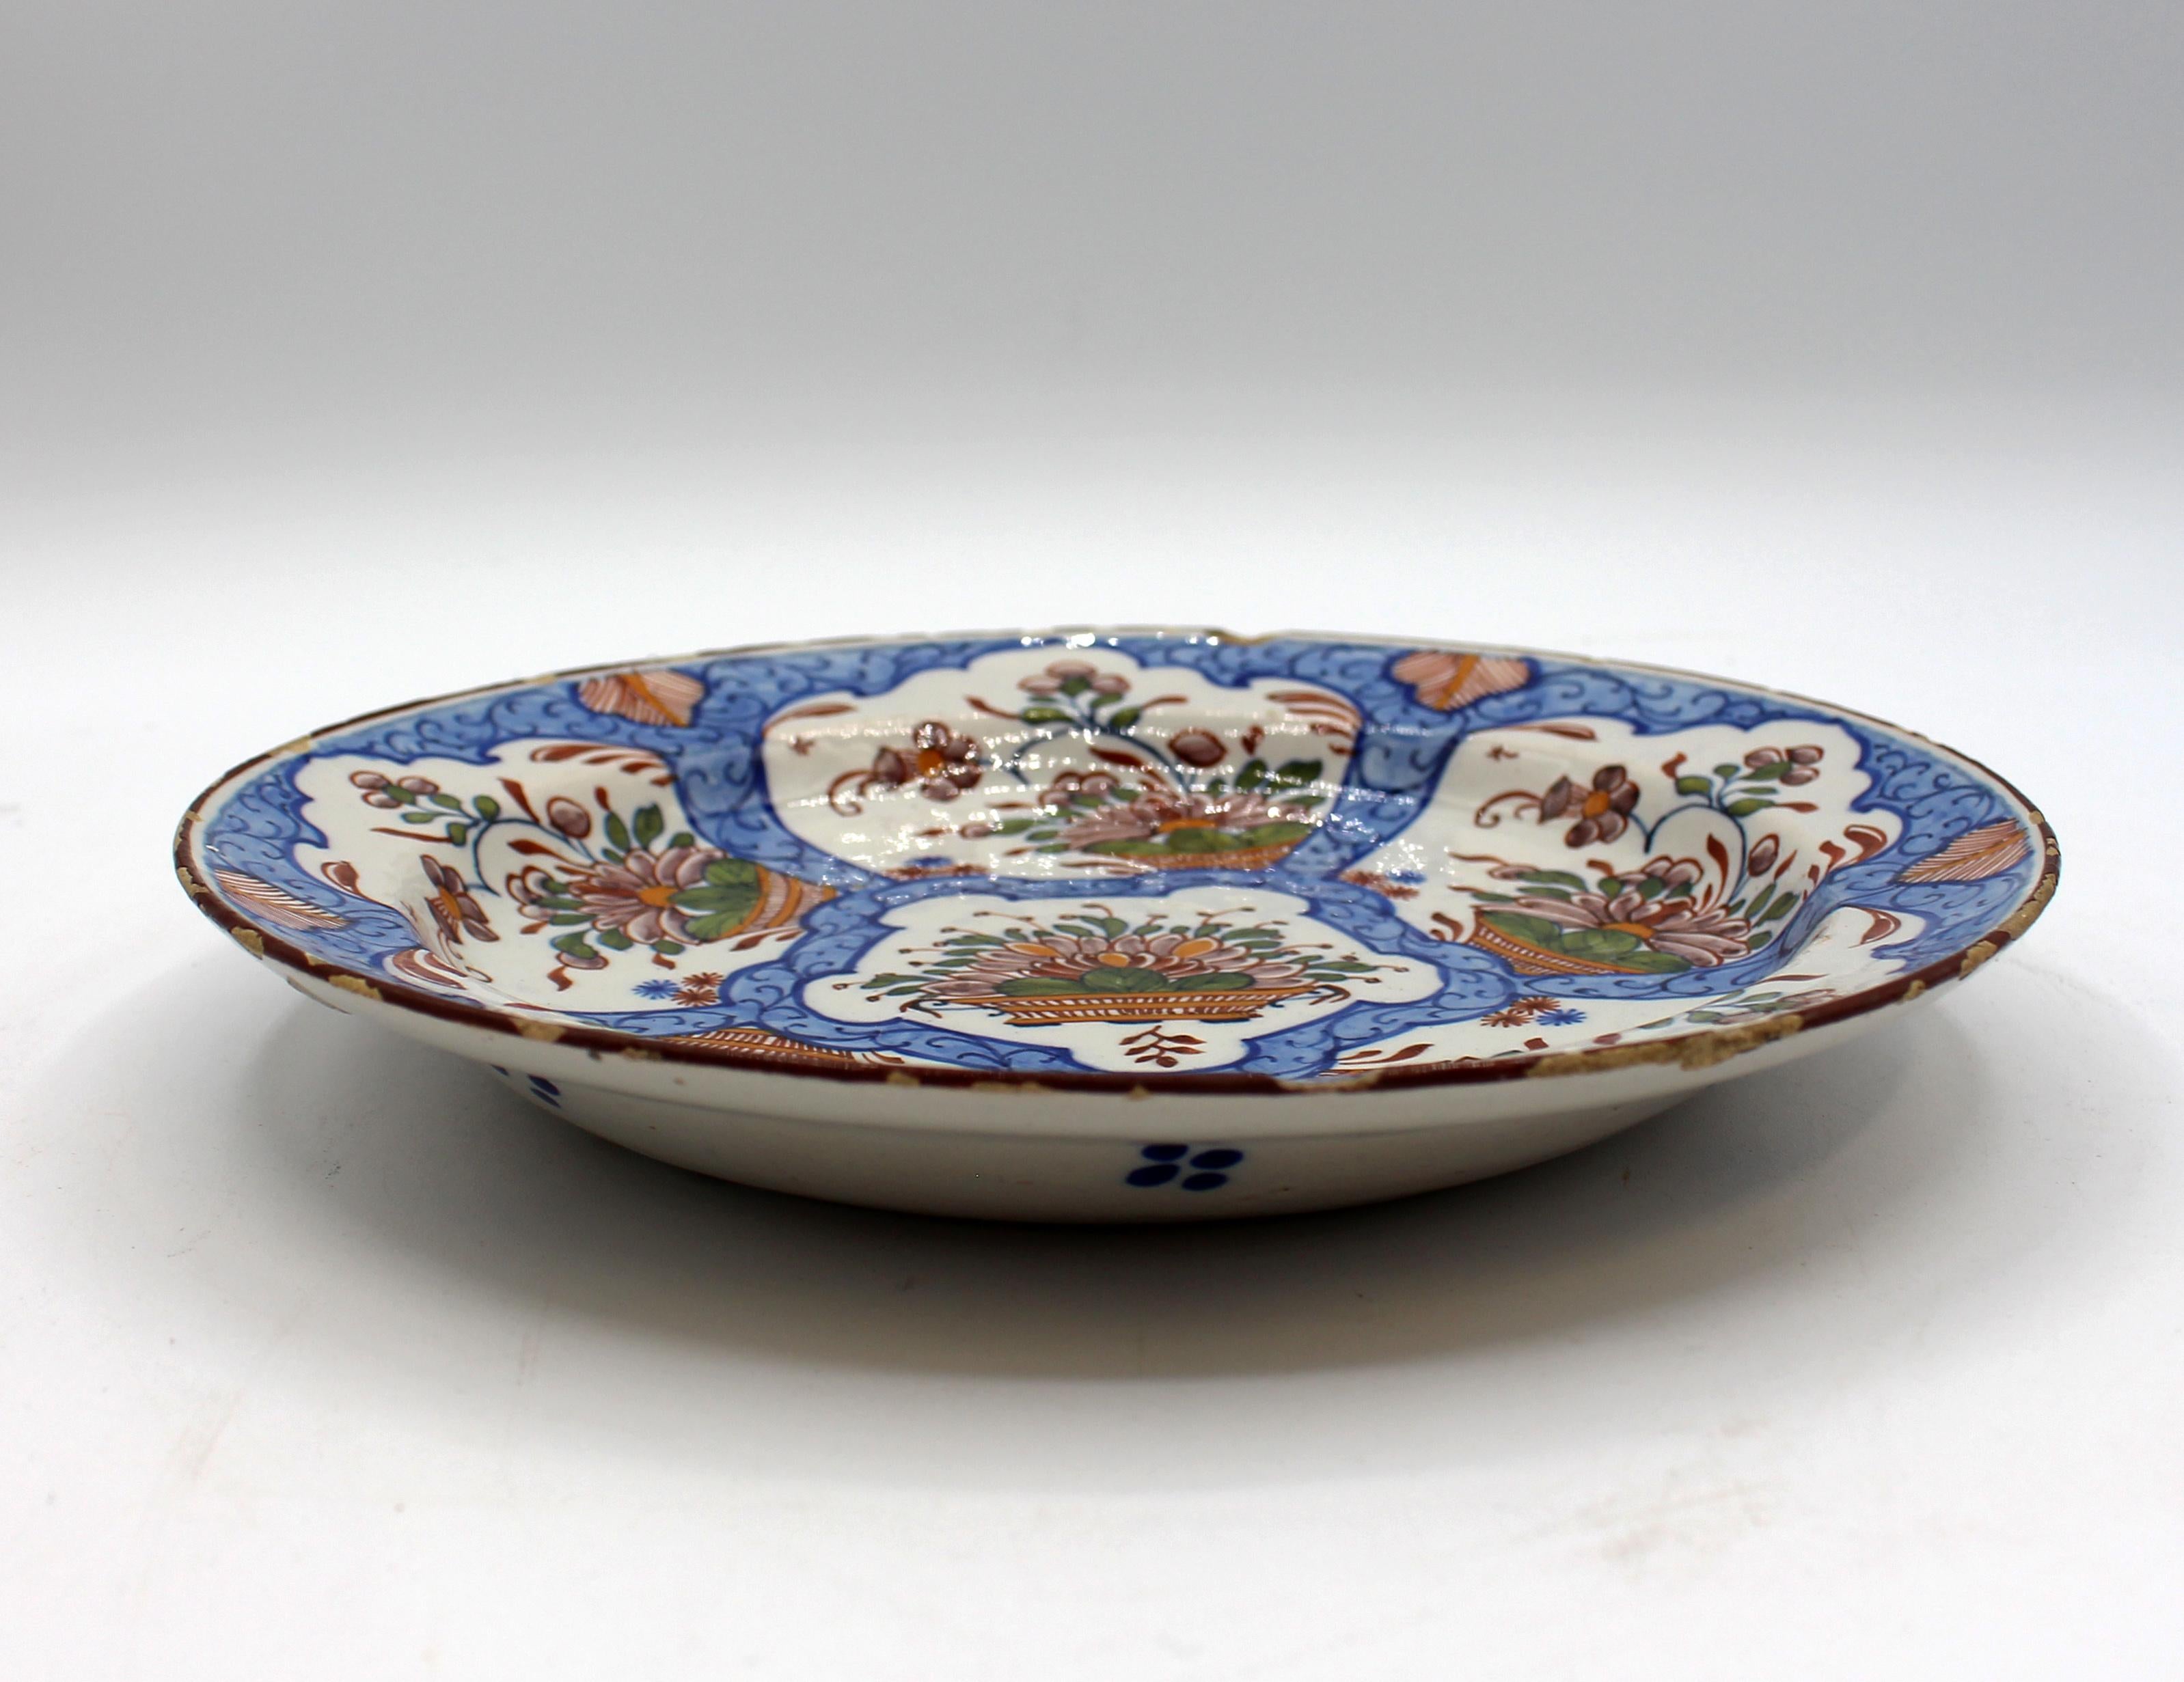 Neoclassical Circa 1770 Delft Polychrome Low Bowl or Plate For Sale